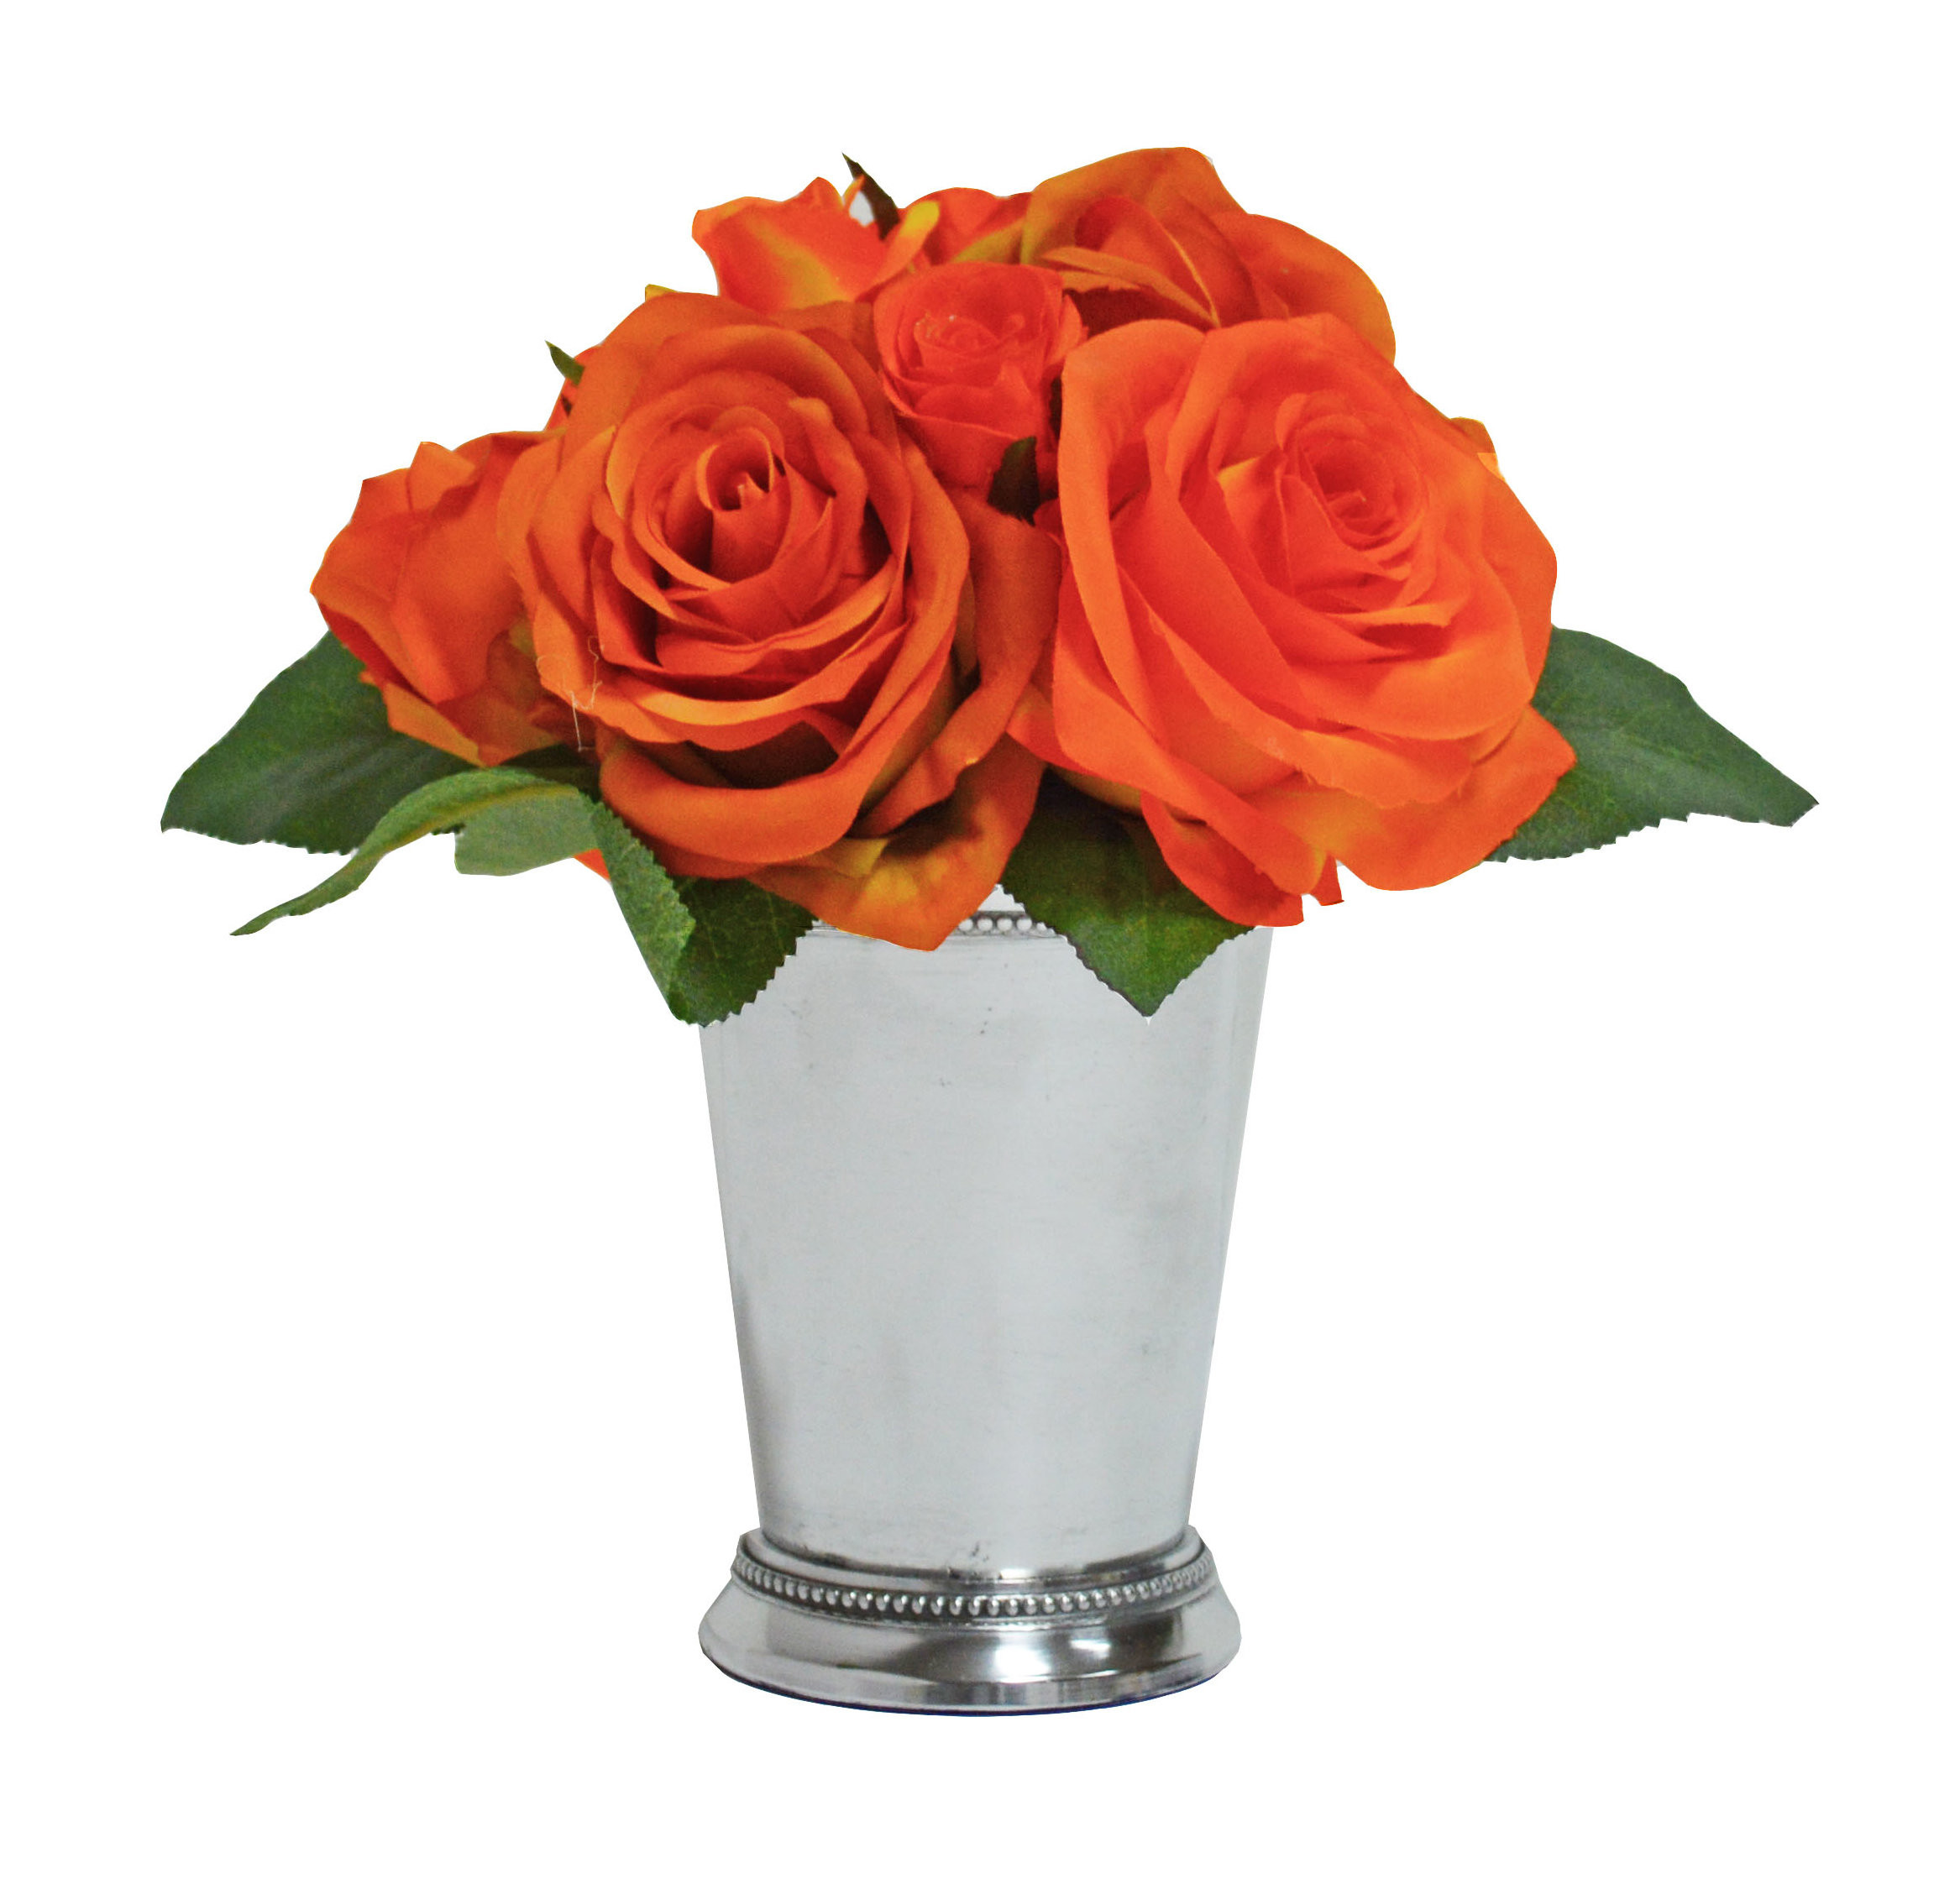 16 Popular Mint Julep Cup Vases wholesale 2024 free download mint julep cup vases wholesale of tree masters inc rose bouquet in mint julep cup reviews wayfair regarding rose bouquet in mint julep cup